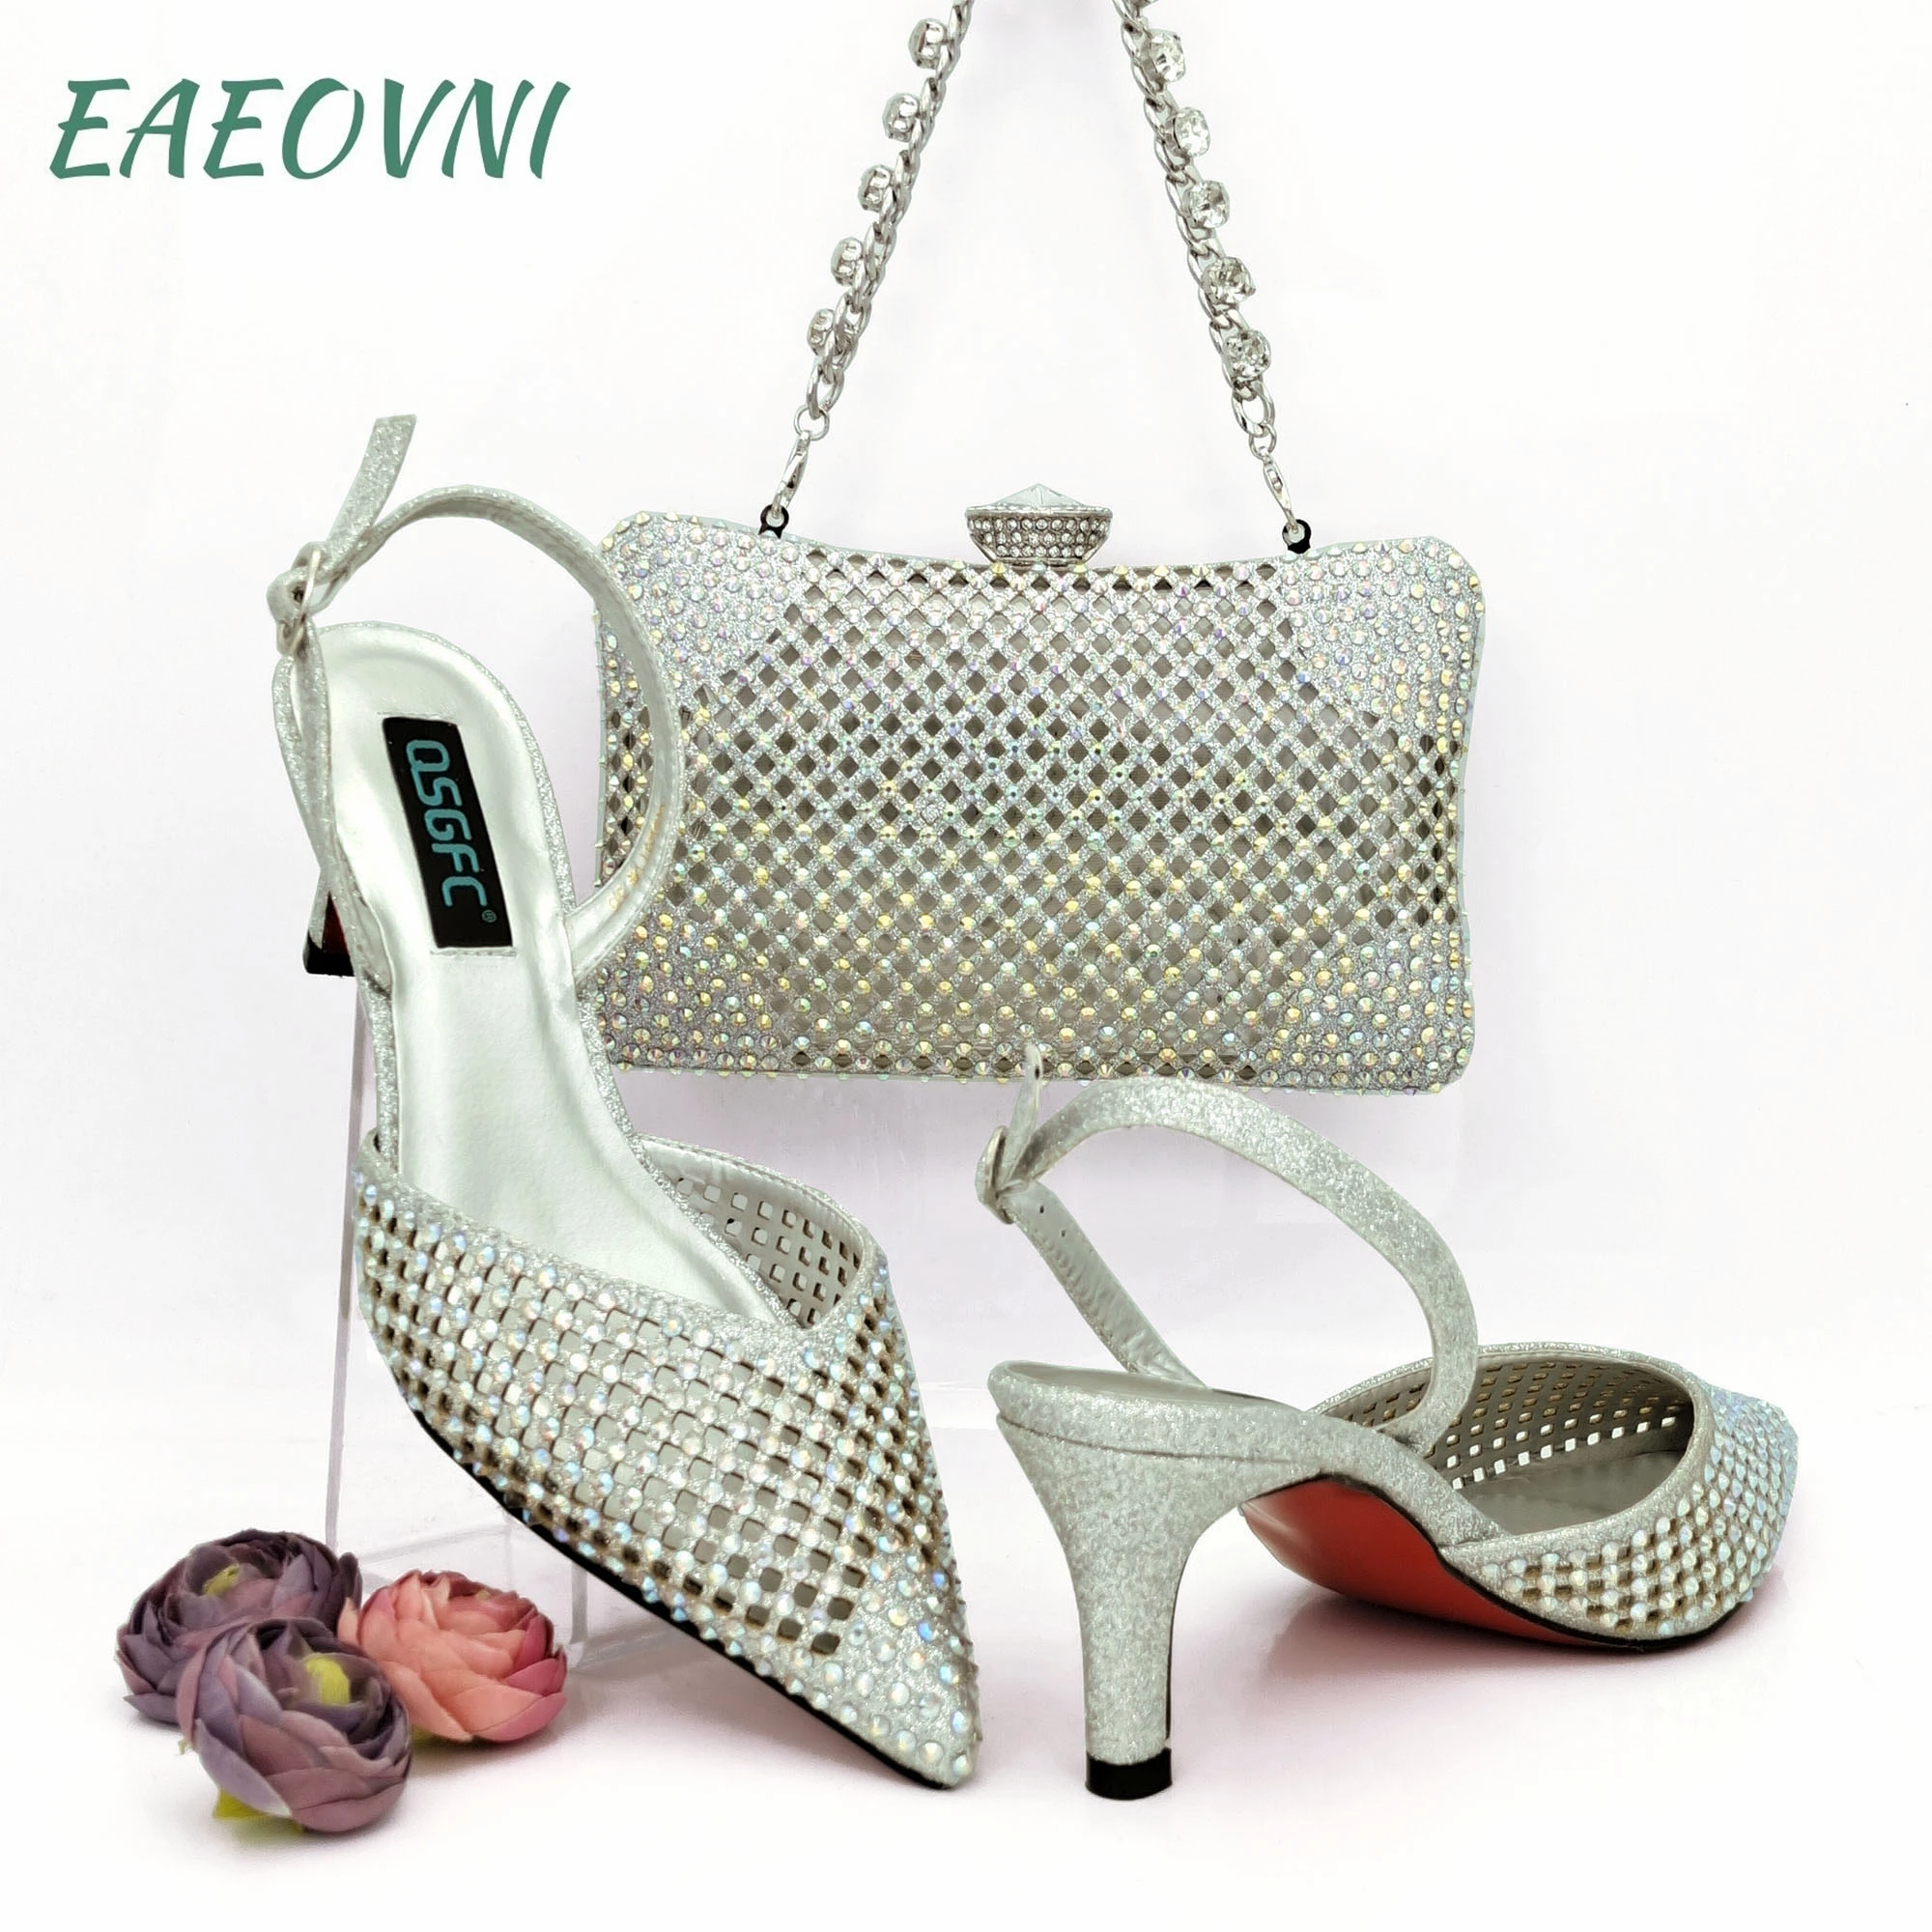 

Silver Color Popular Pointed-Toe Stiletto Shoes And Three-Dimensional Handbags For Parties Or Commuting